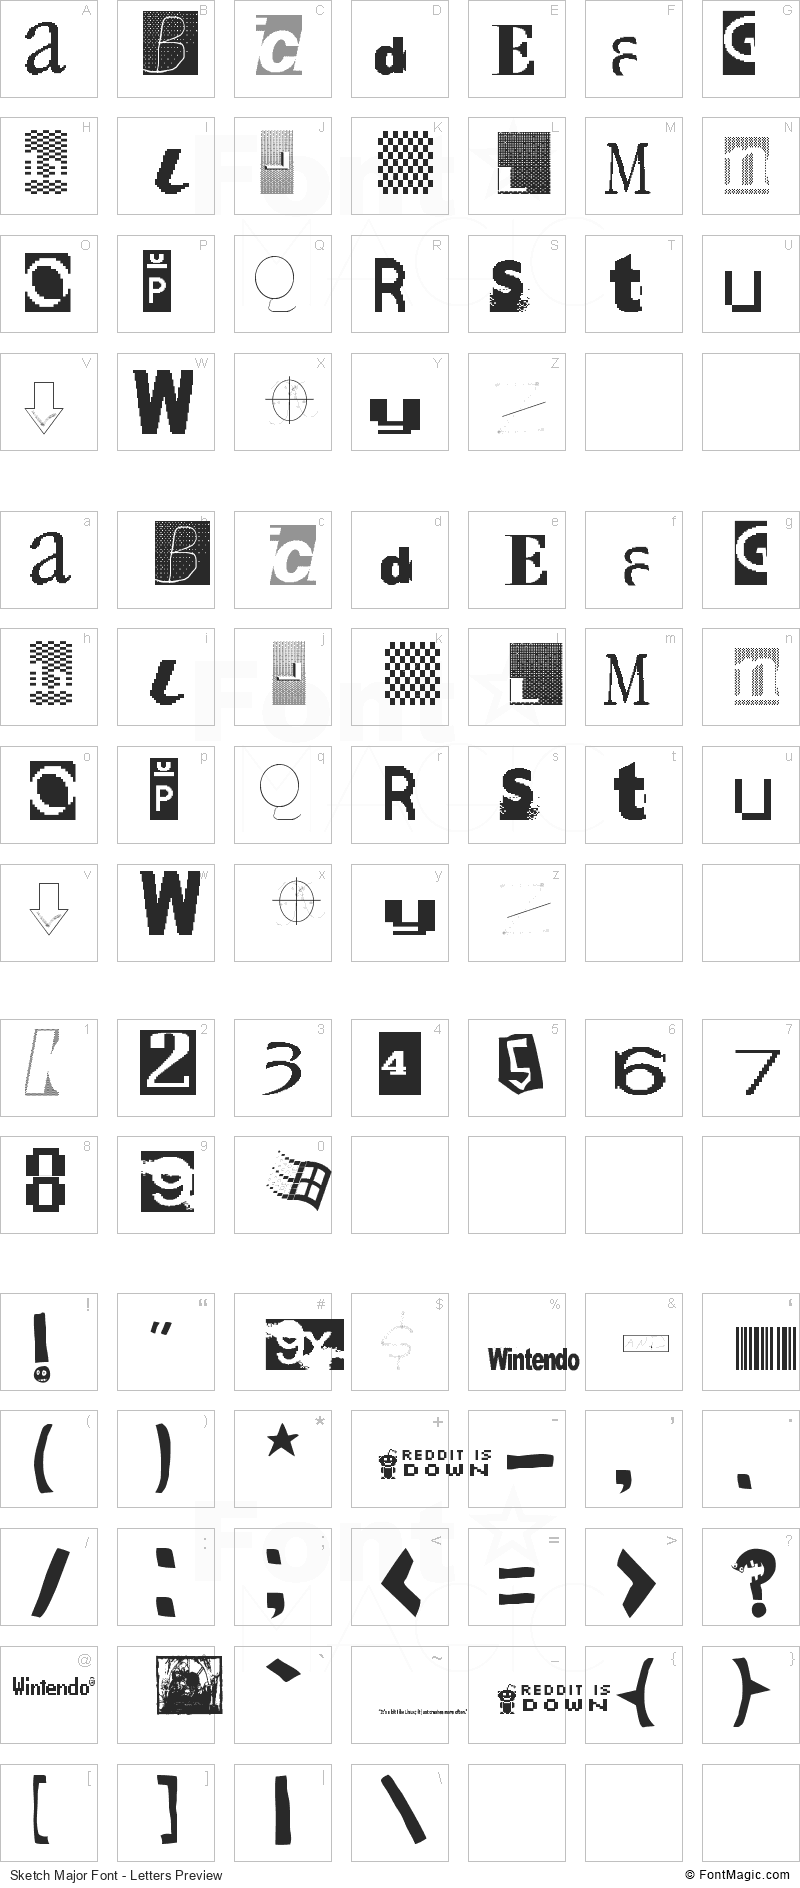 Sketch Major Font - All Latters Preview Chart